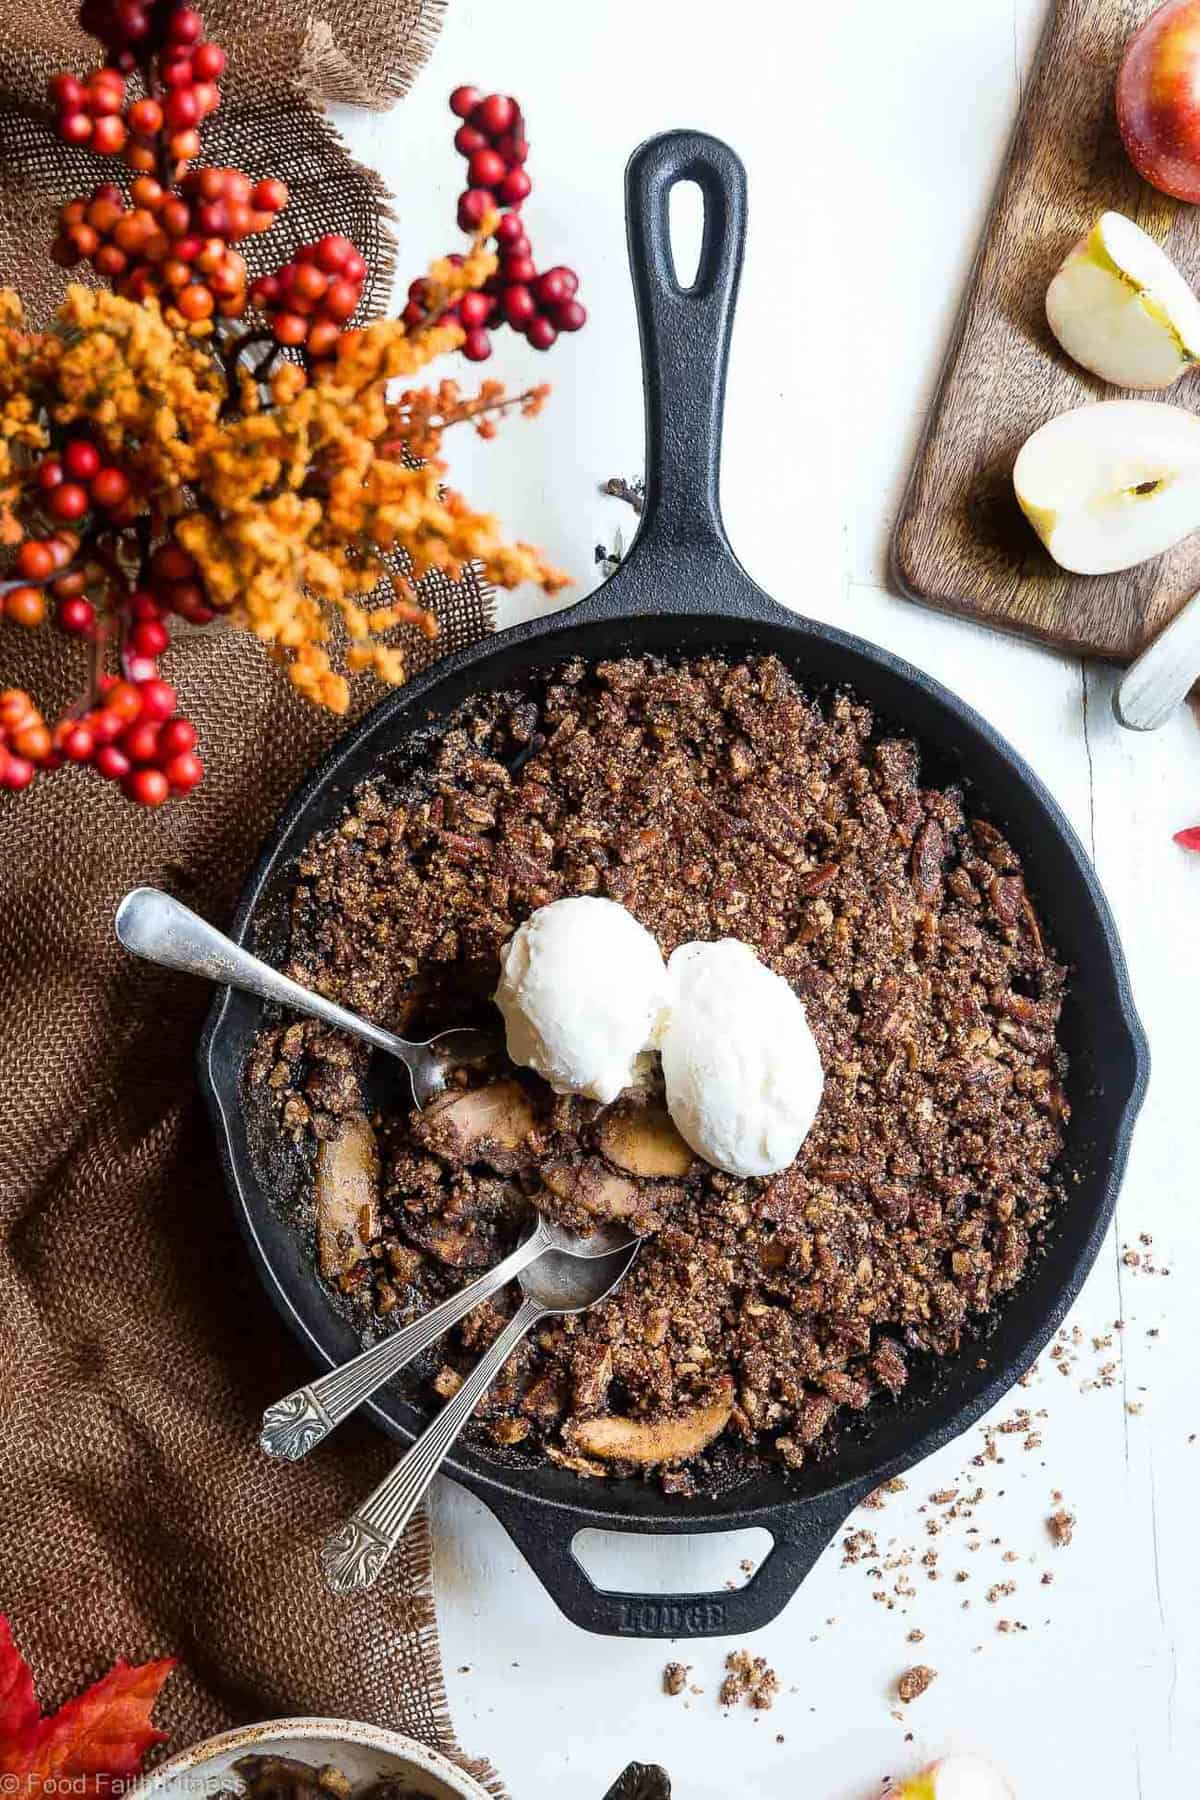 The BEST Paleo Vegan Apple Crisp with Coconut Flour - This almond flour apple crisp is an EASY, cozy fall dessert made with simple, wholesome ingredients! Perfectly crispy, and spicy-sweet that you won't believe it's gluten free, dairy free and better for you! | #Foodfaithfitness | #Vegan #Paleo #Healthy #Glutenfree #Dairyfree